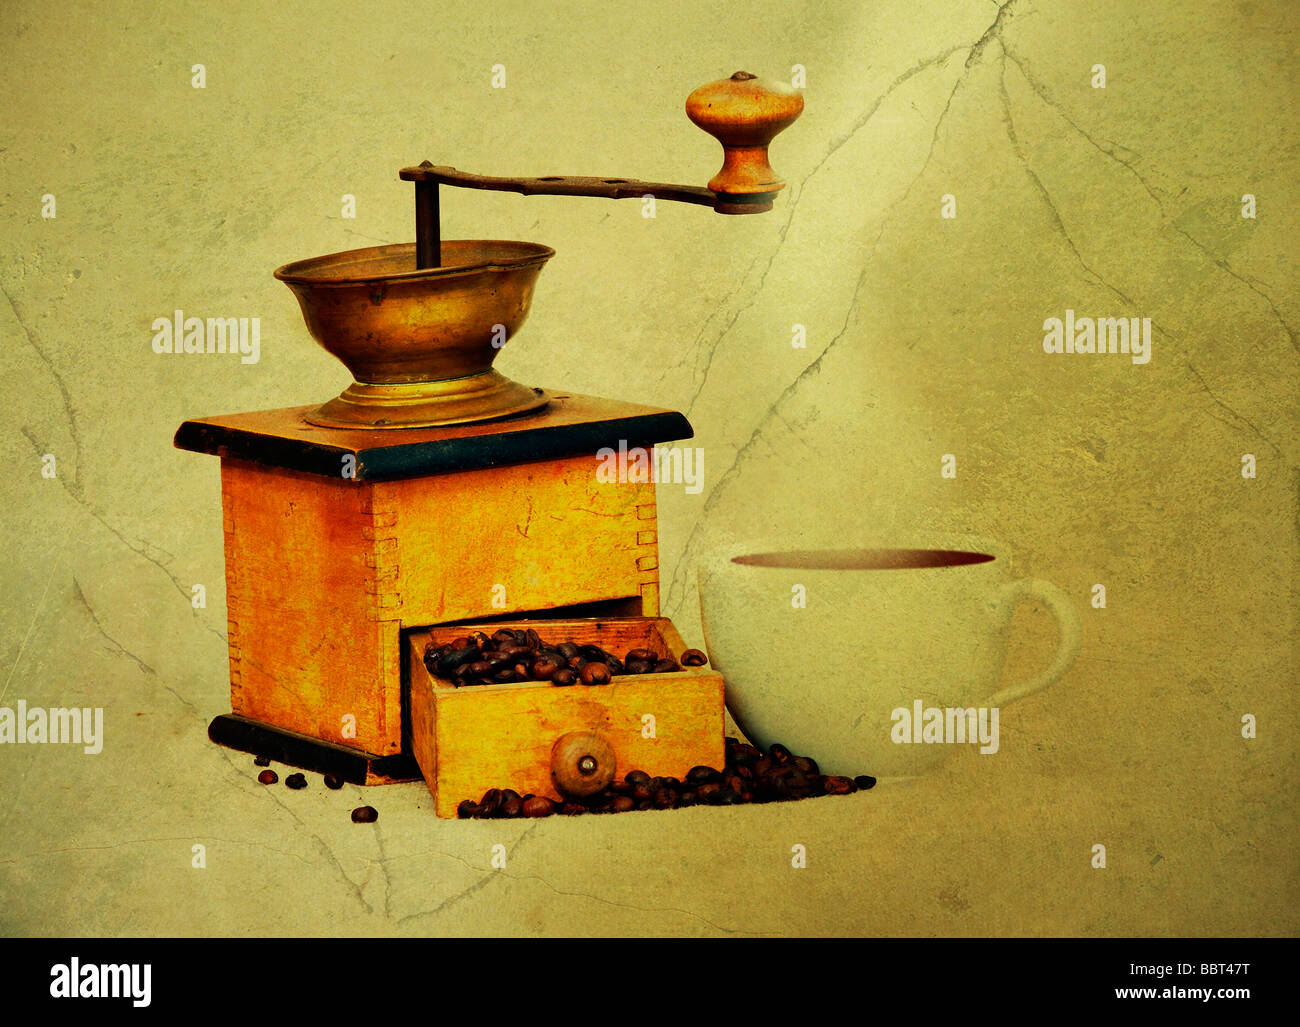 Antique coffee grinder with coffee beans an cup of hot black coffee in grunge style Stock Photo